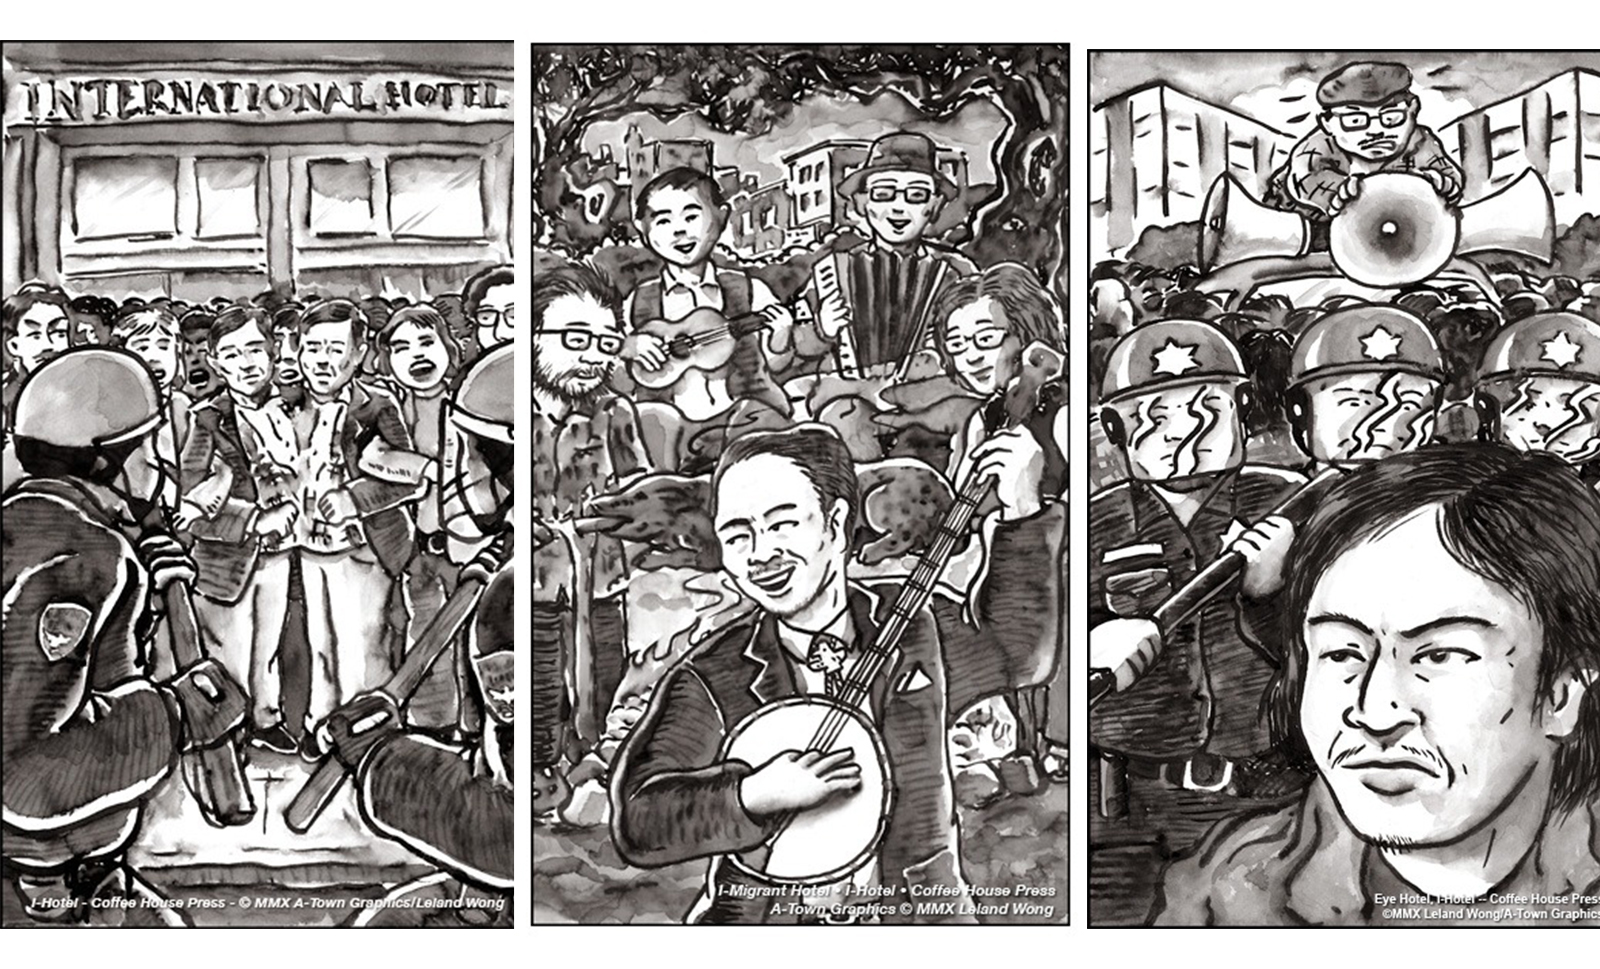 Three Chinese ink illustrations depicting the life and protests around the I Hotel